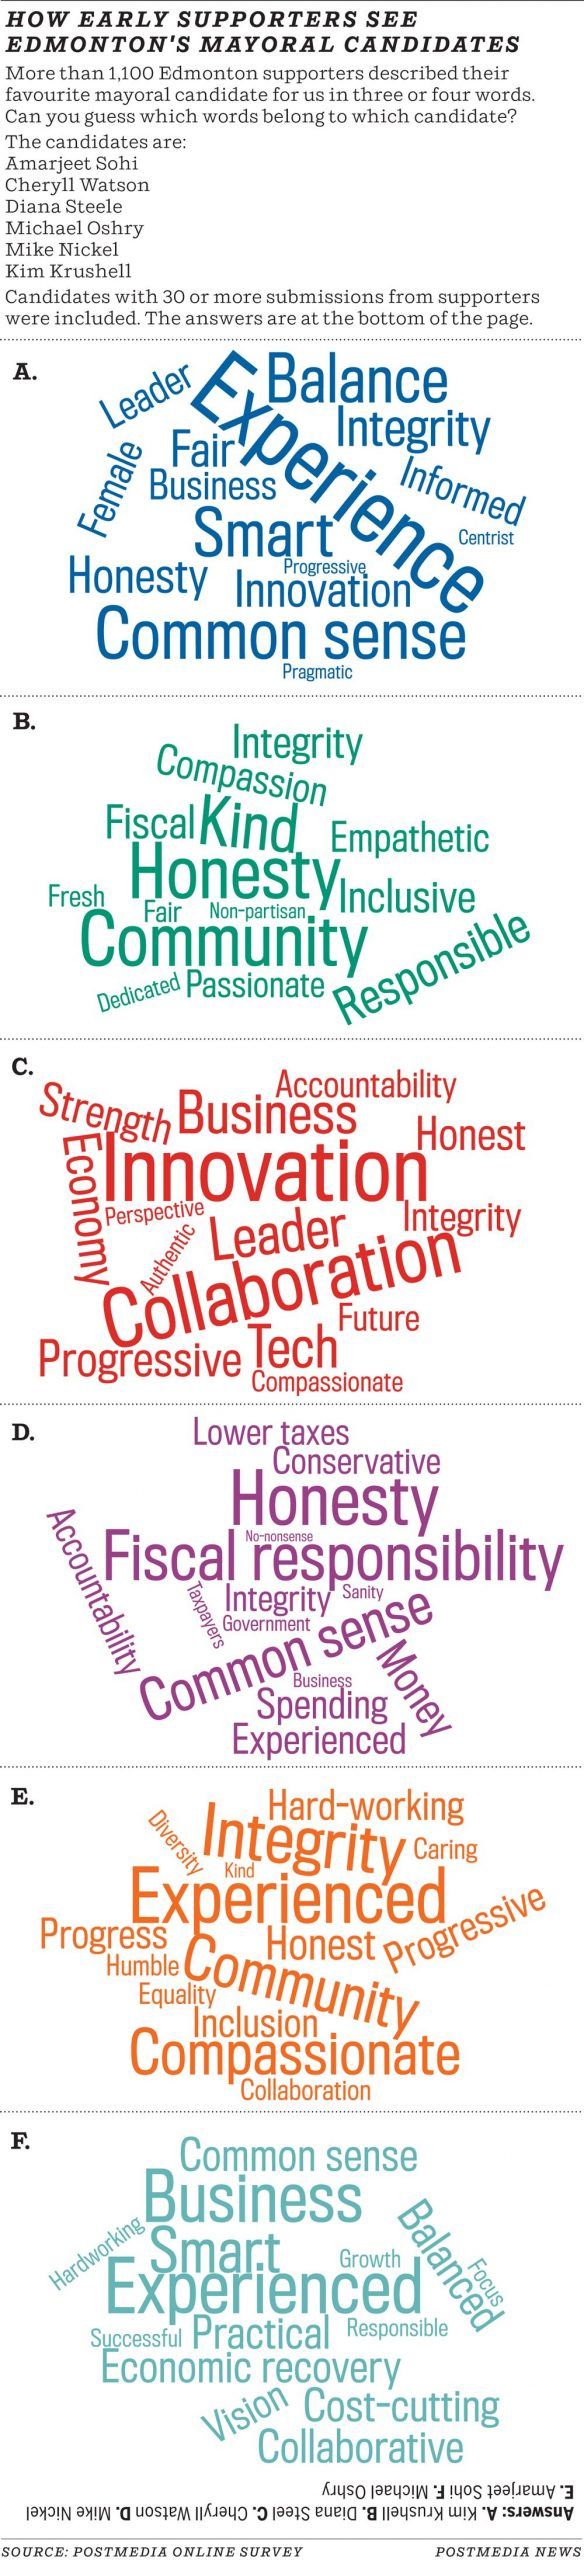 Word clouds describing the mayoral candidates